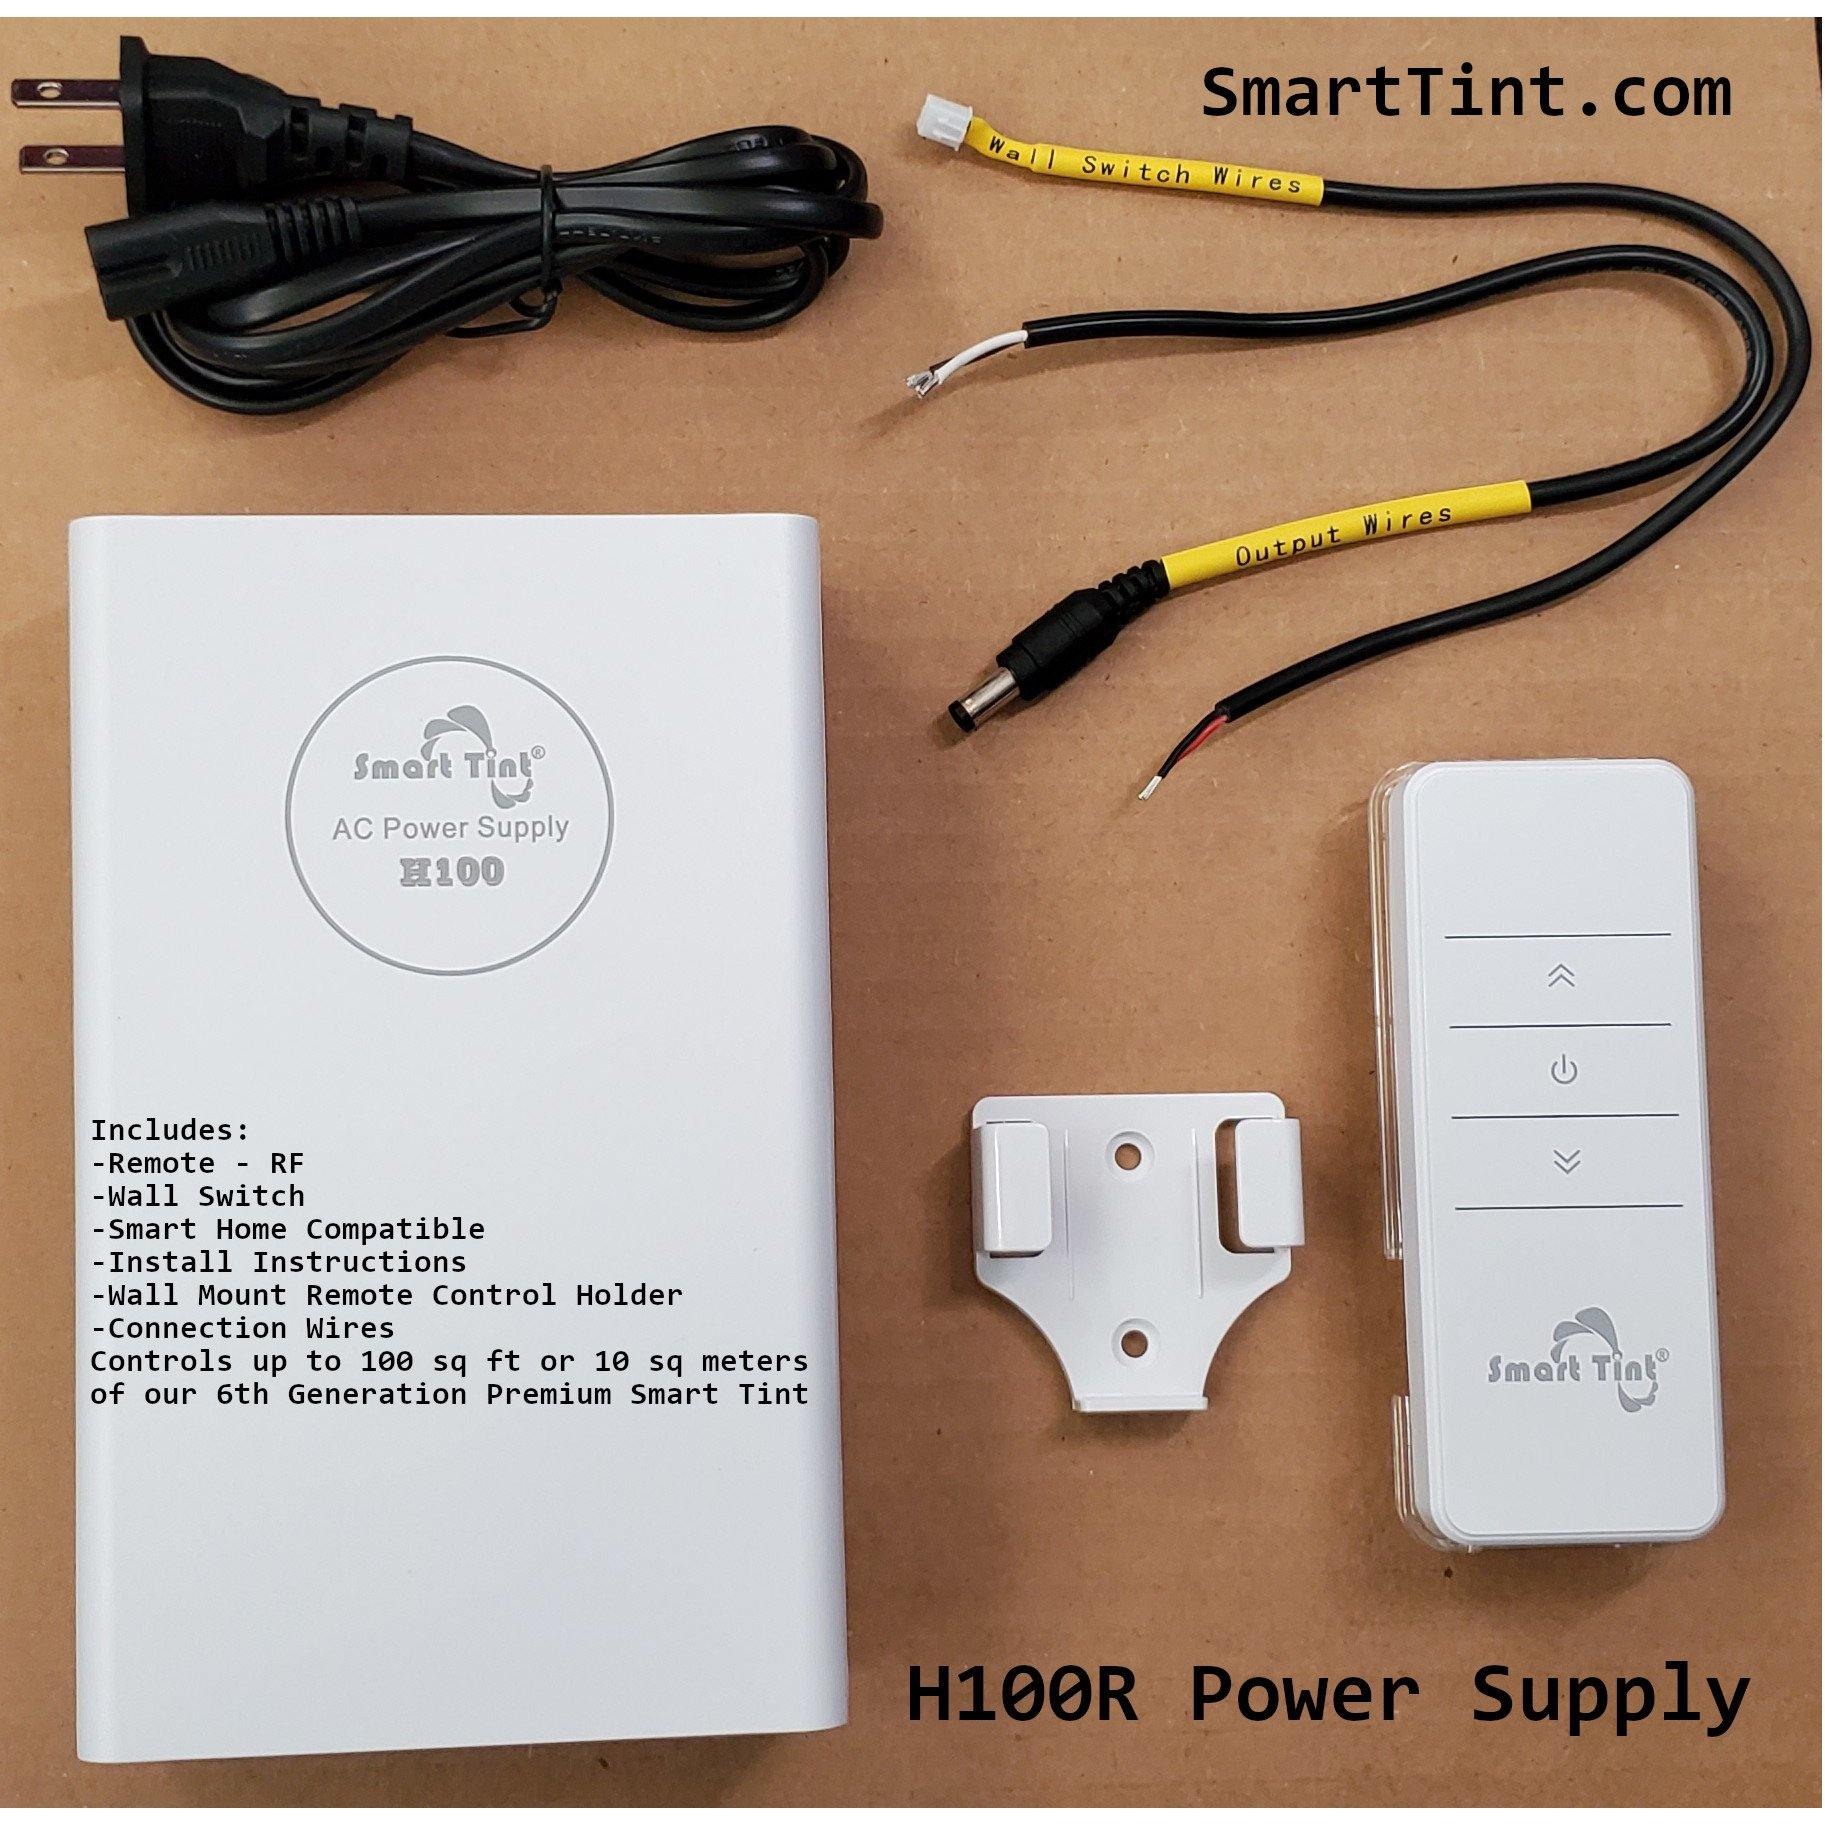 Smart Tint Power Supply H-100R with Remote Control/Wall Switch - Smart Film